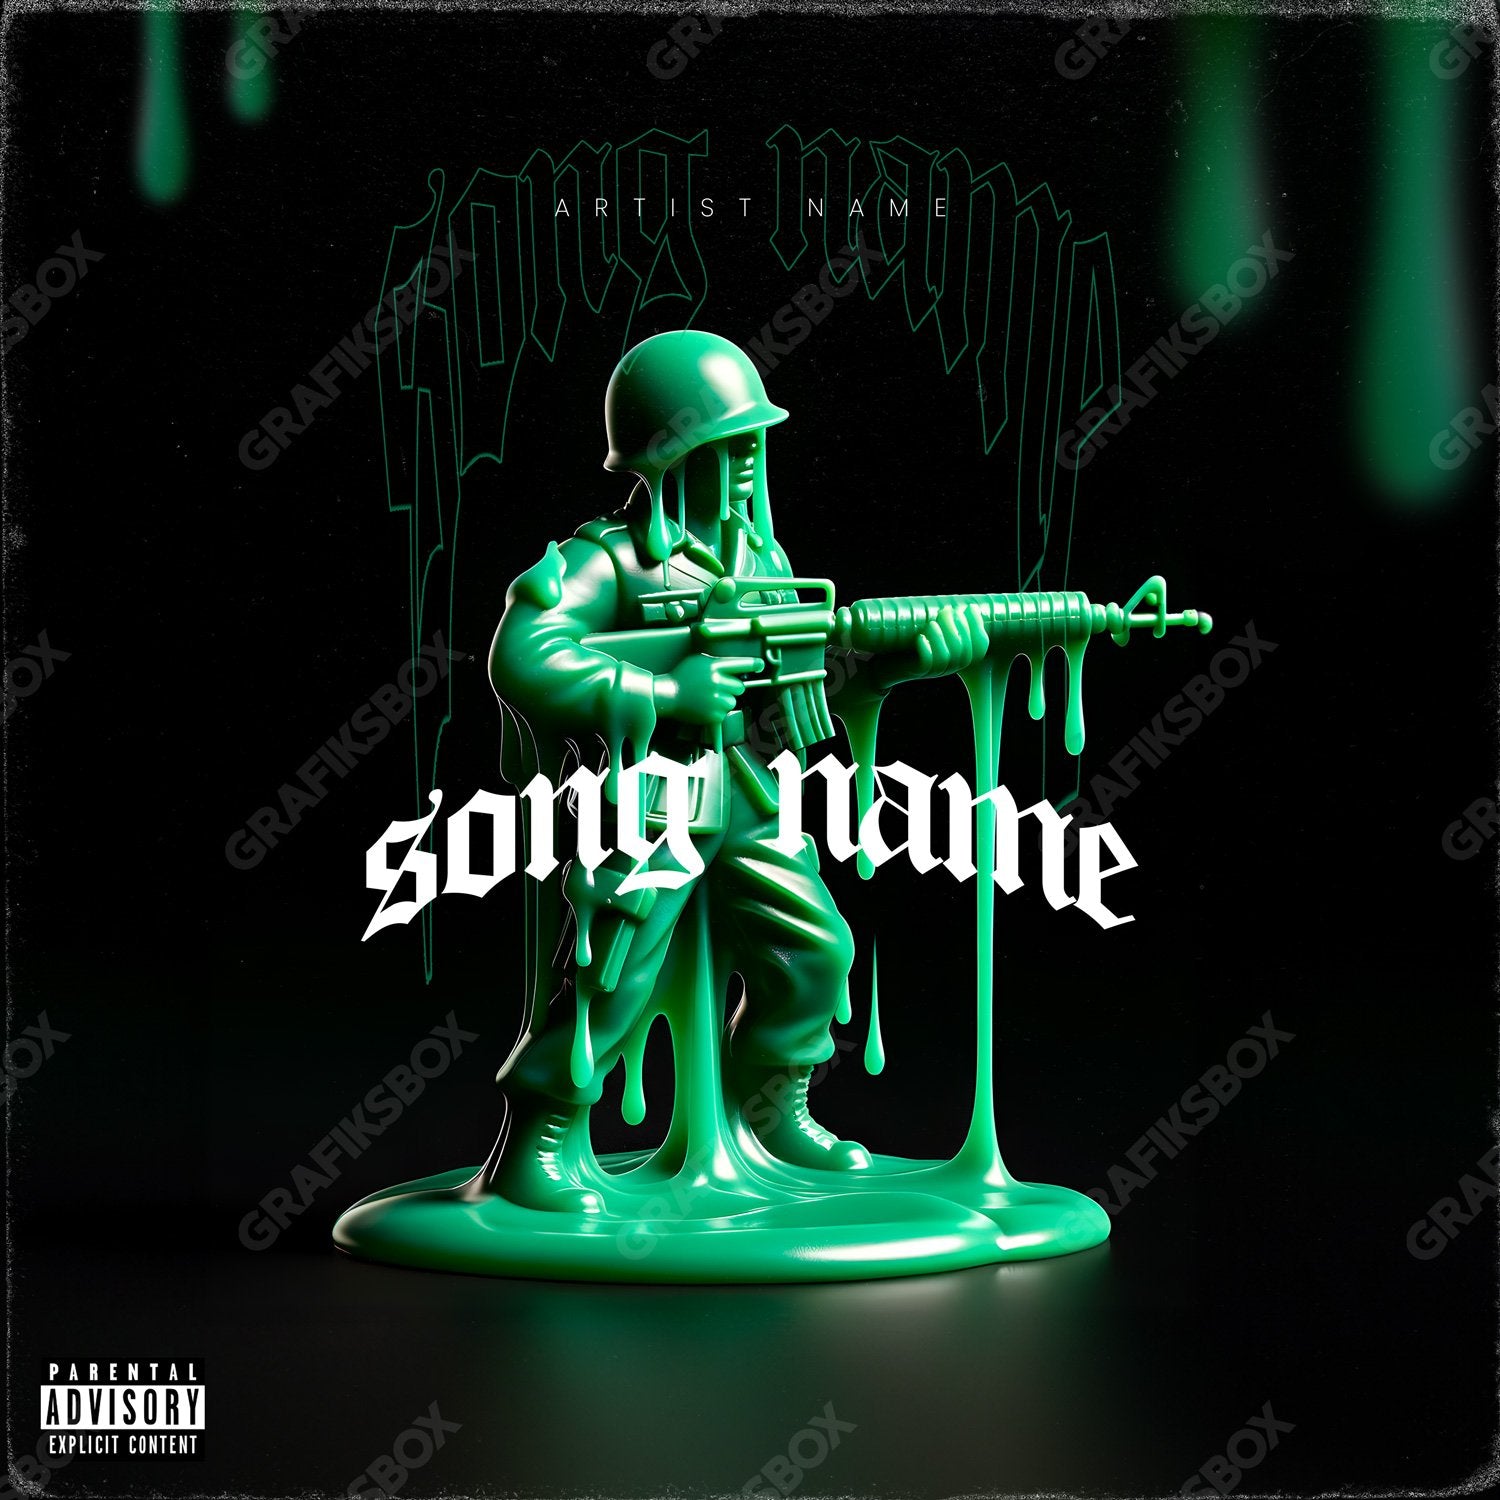 Drip Soldier premade cover art